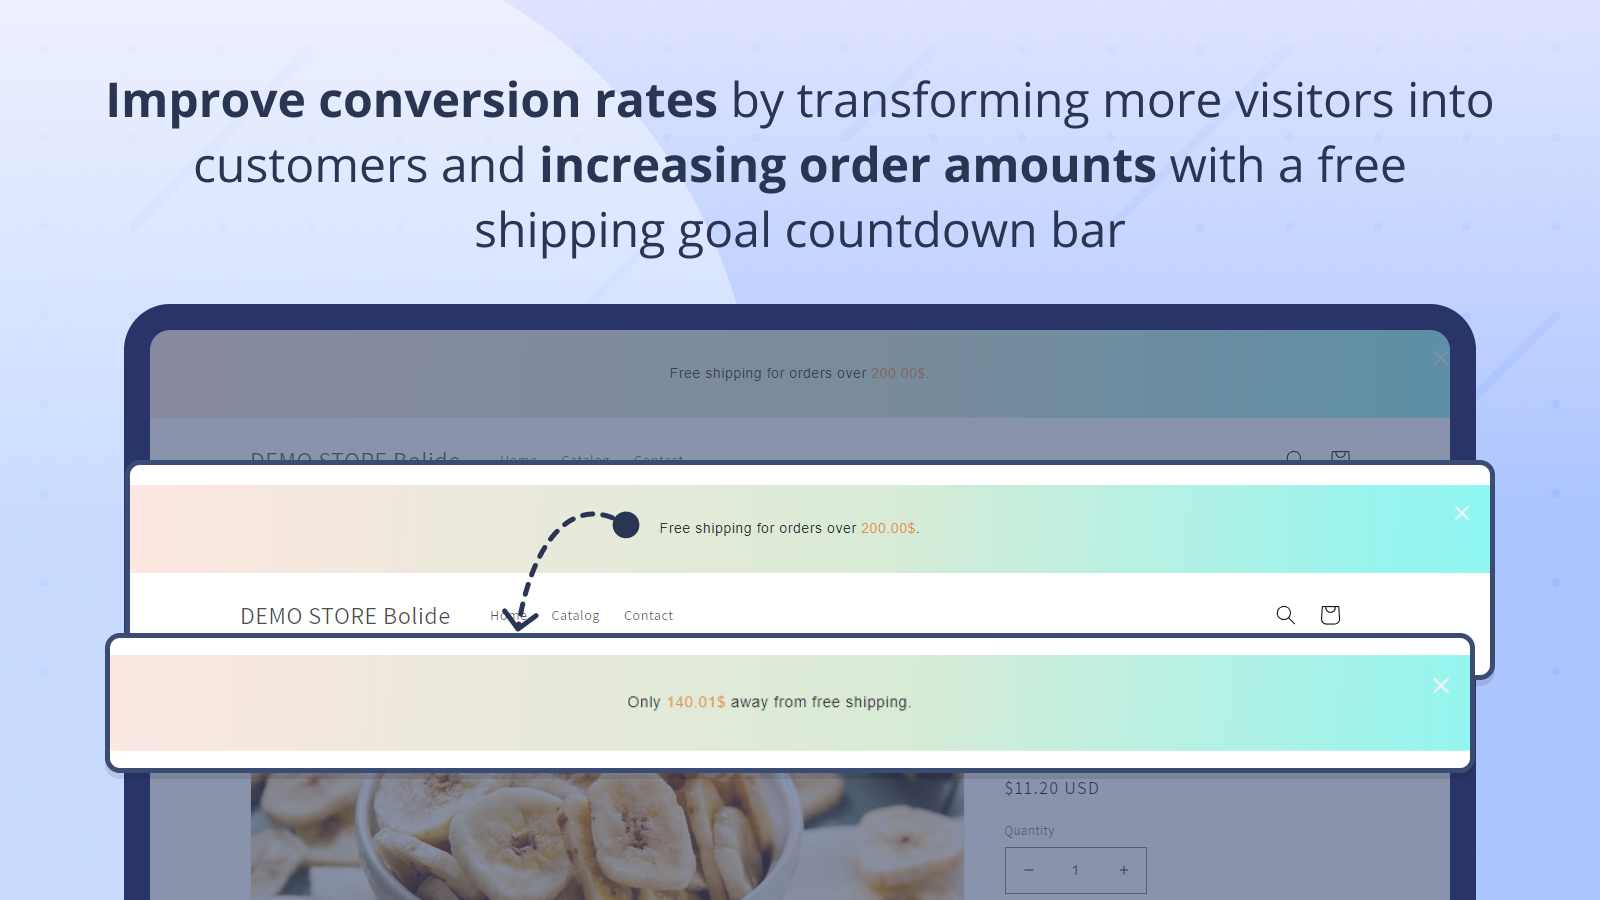 Improve conversion rates with a free shipping goal countdown bar